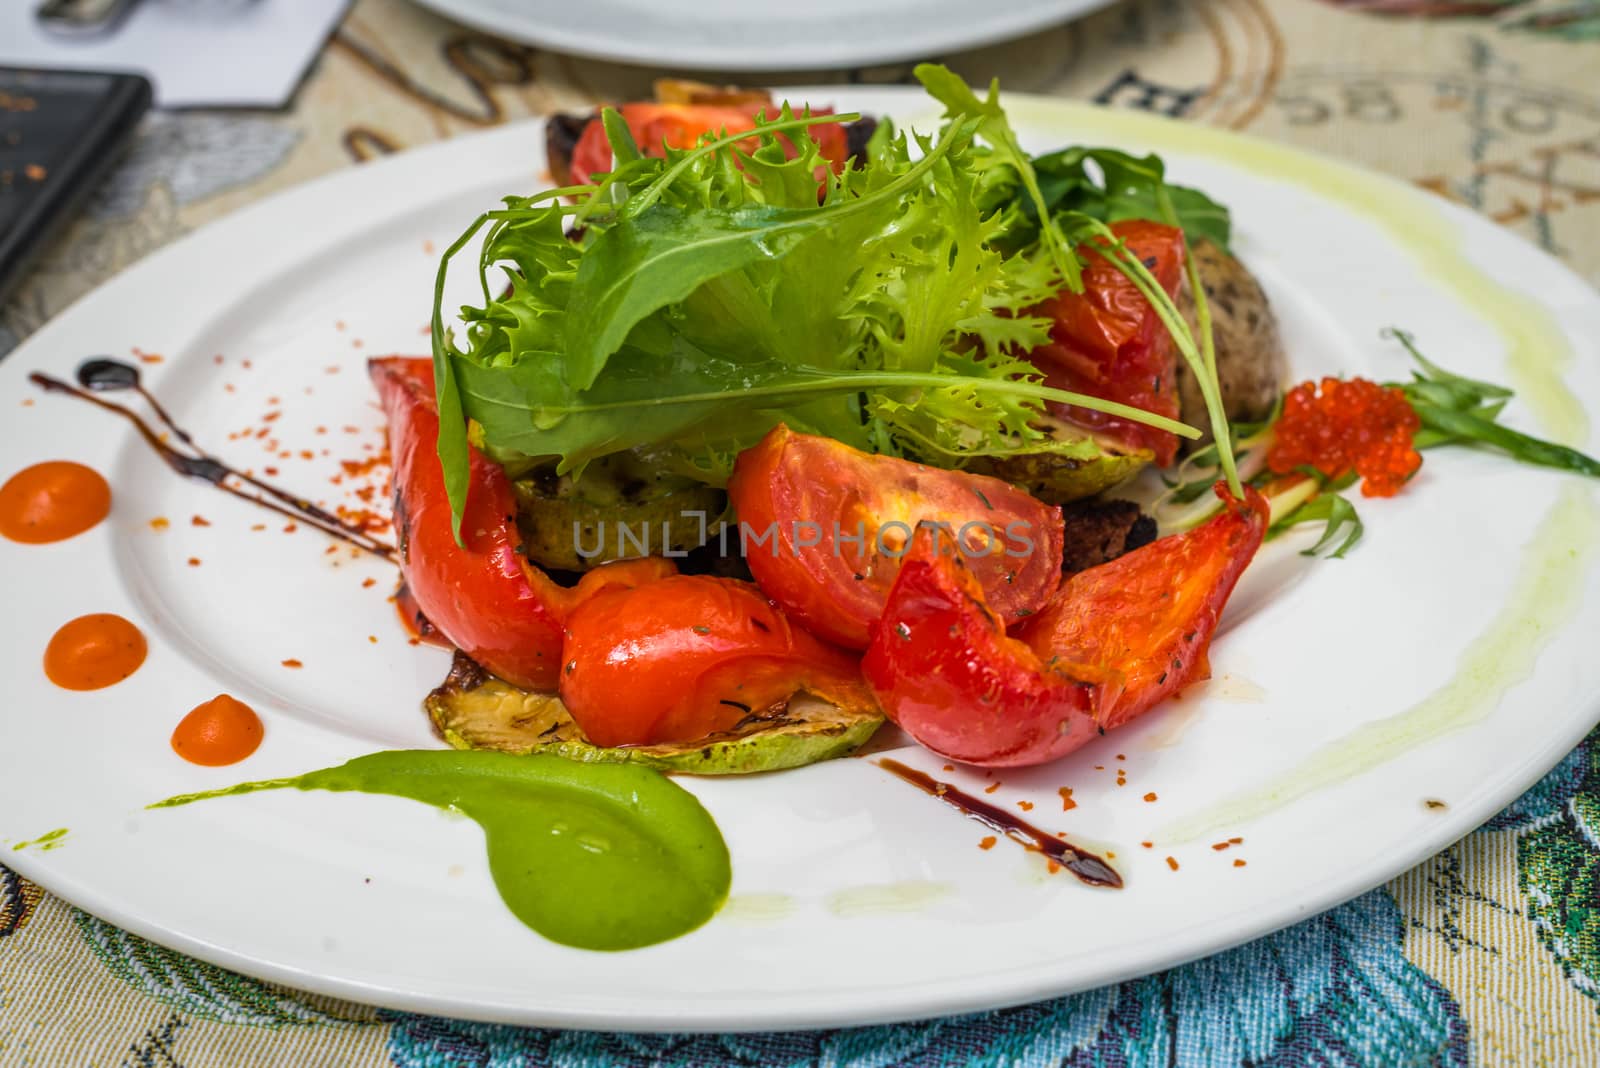 Baked tomatoes and peppers with Greens on a white plate